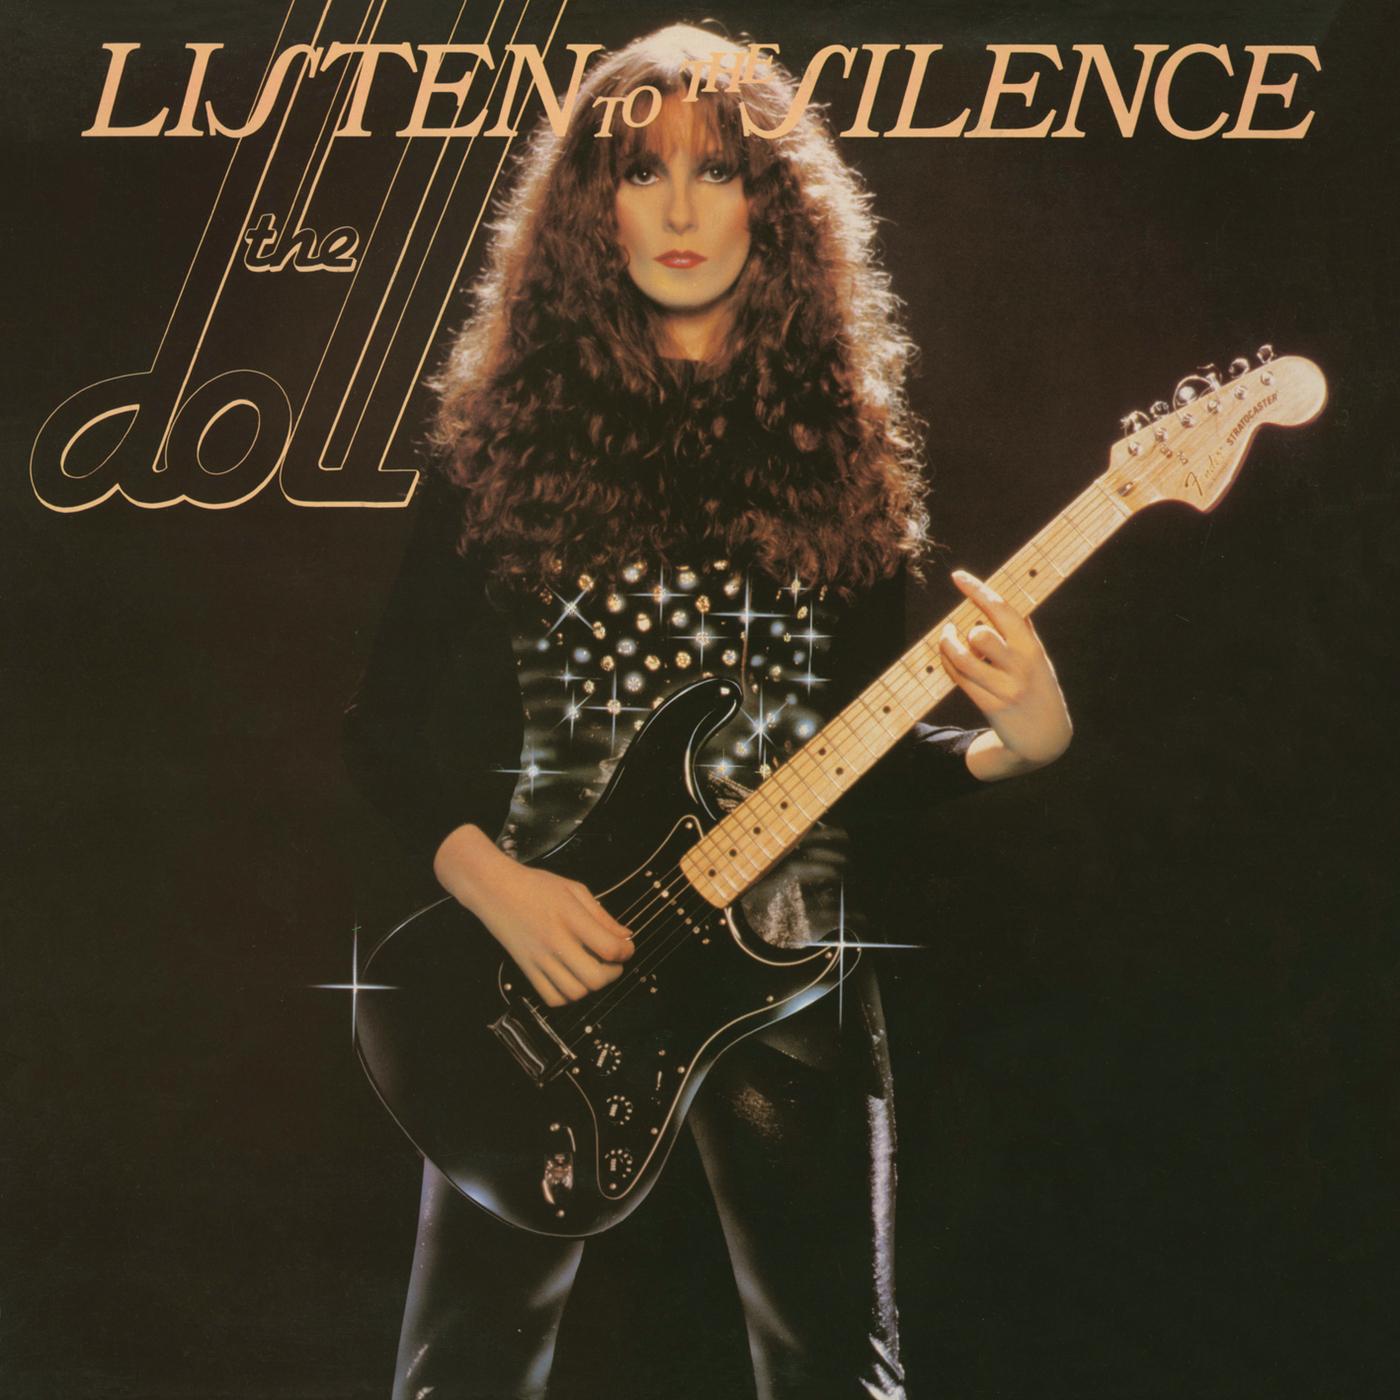 Listen to the Silence (Expanded Edition)